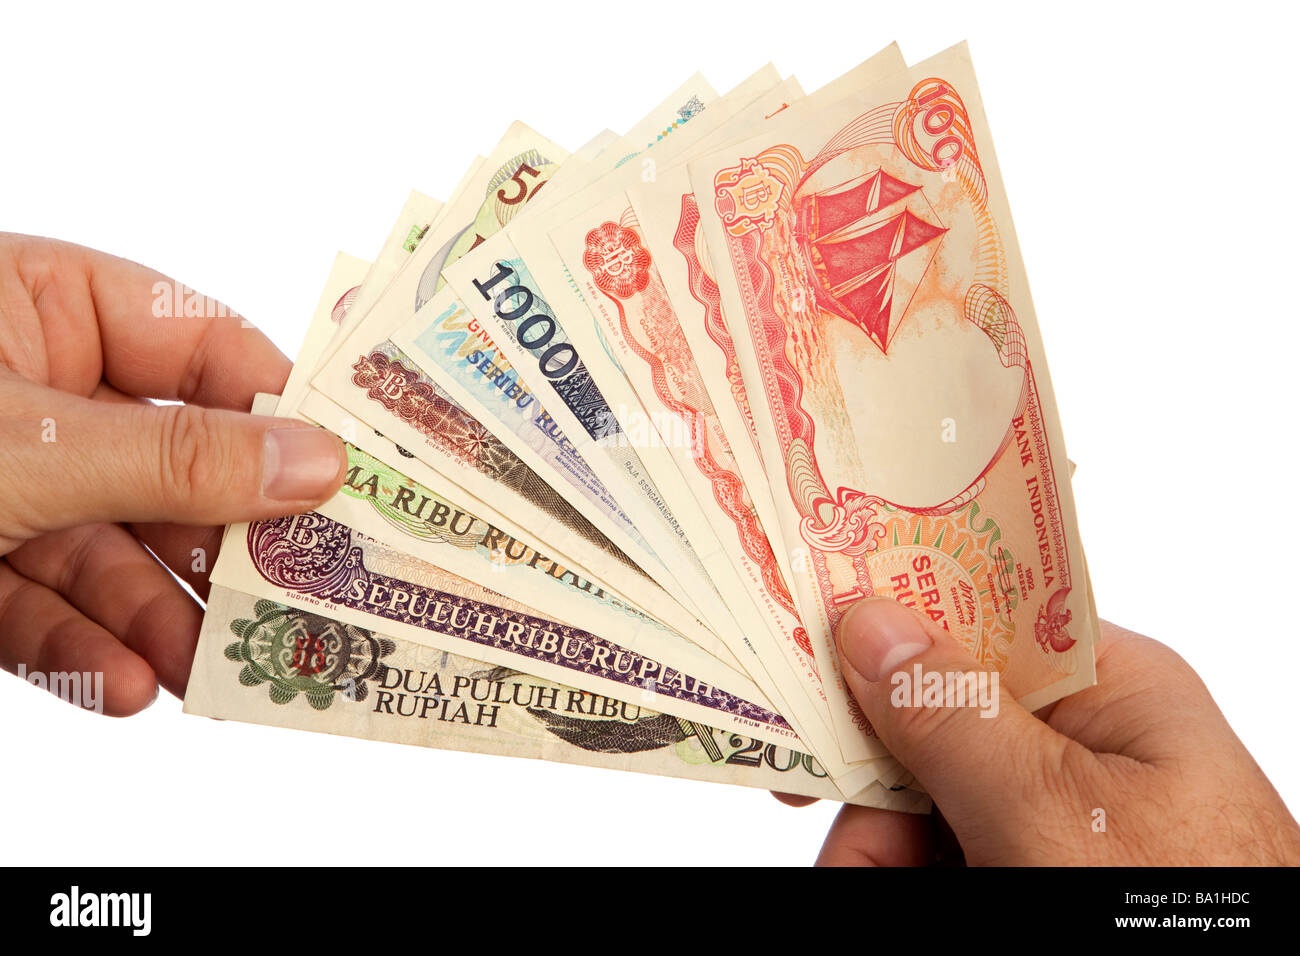 Money male hand holding handful of Indonesian currency Stock Photo